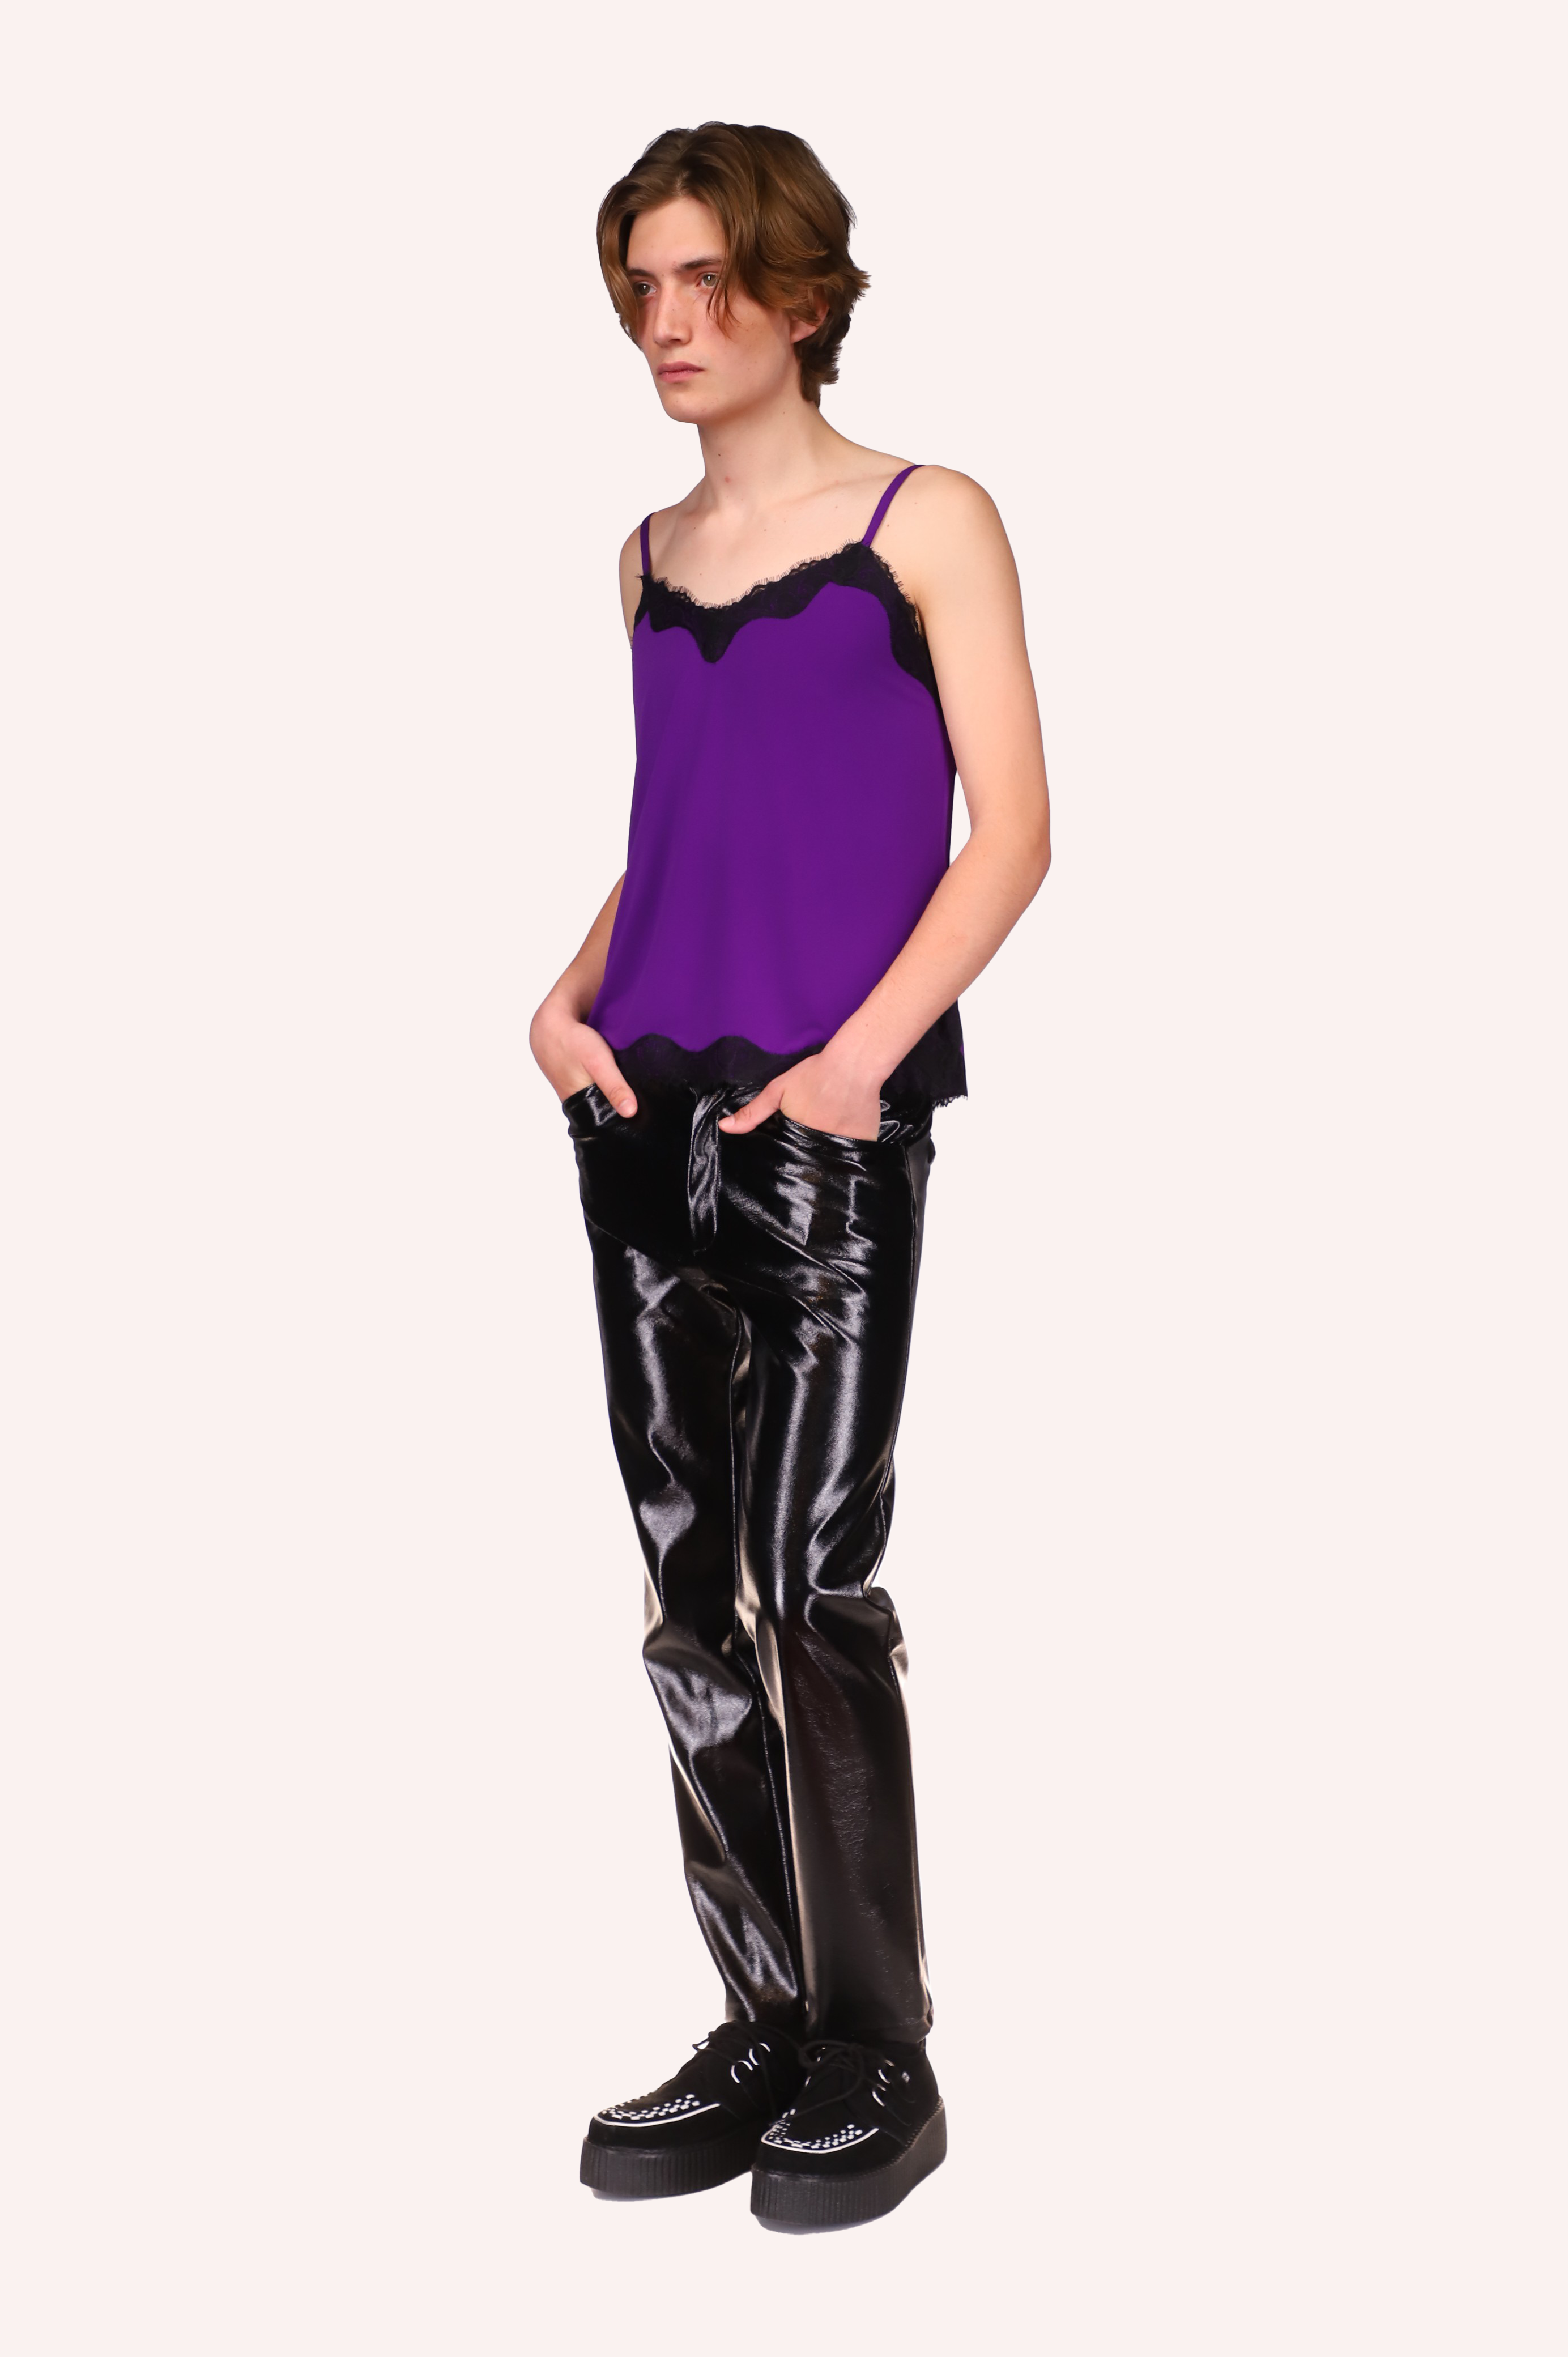 Genderless Pants, above ankles to show you socks, 2 front pocket, front zipper, in a shiny black texture, 